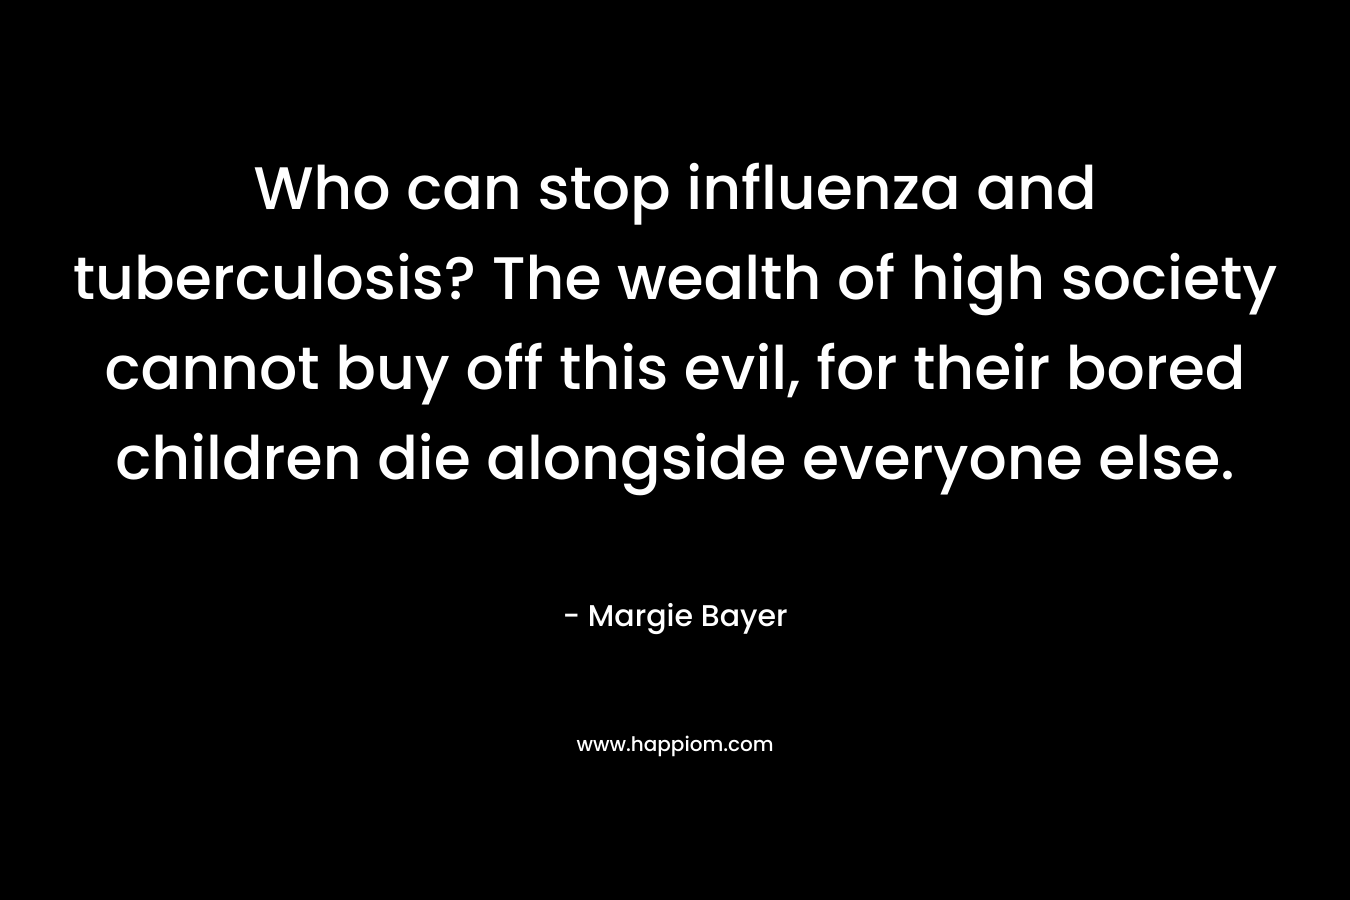 Who can stop influenza and tuberculosis? The wealth of high society cannot buy off this evil, for their bored children die alongside everyone else.